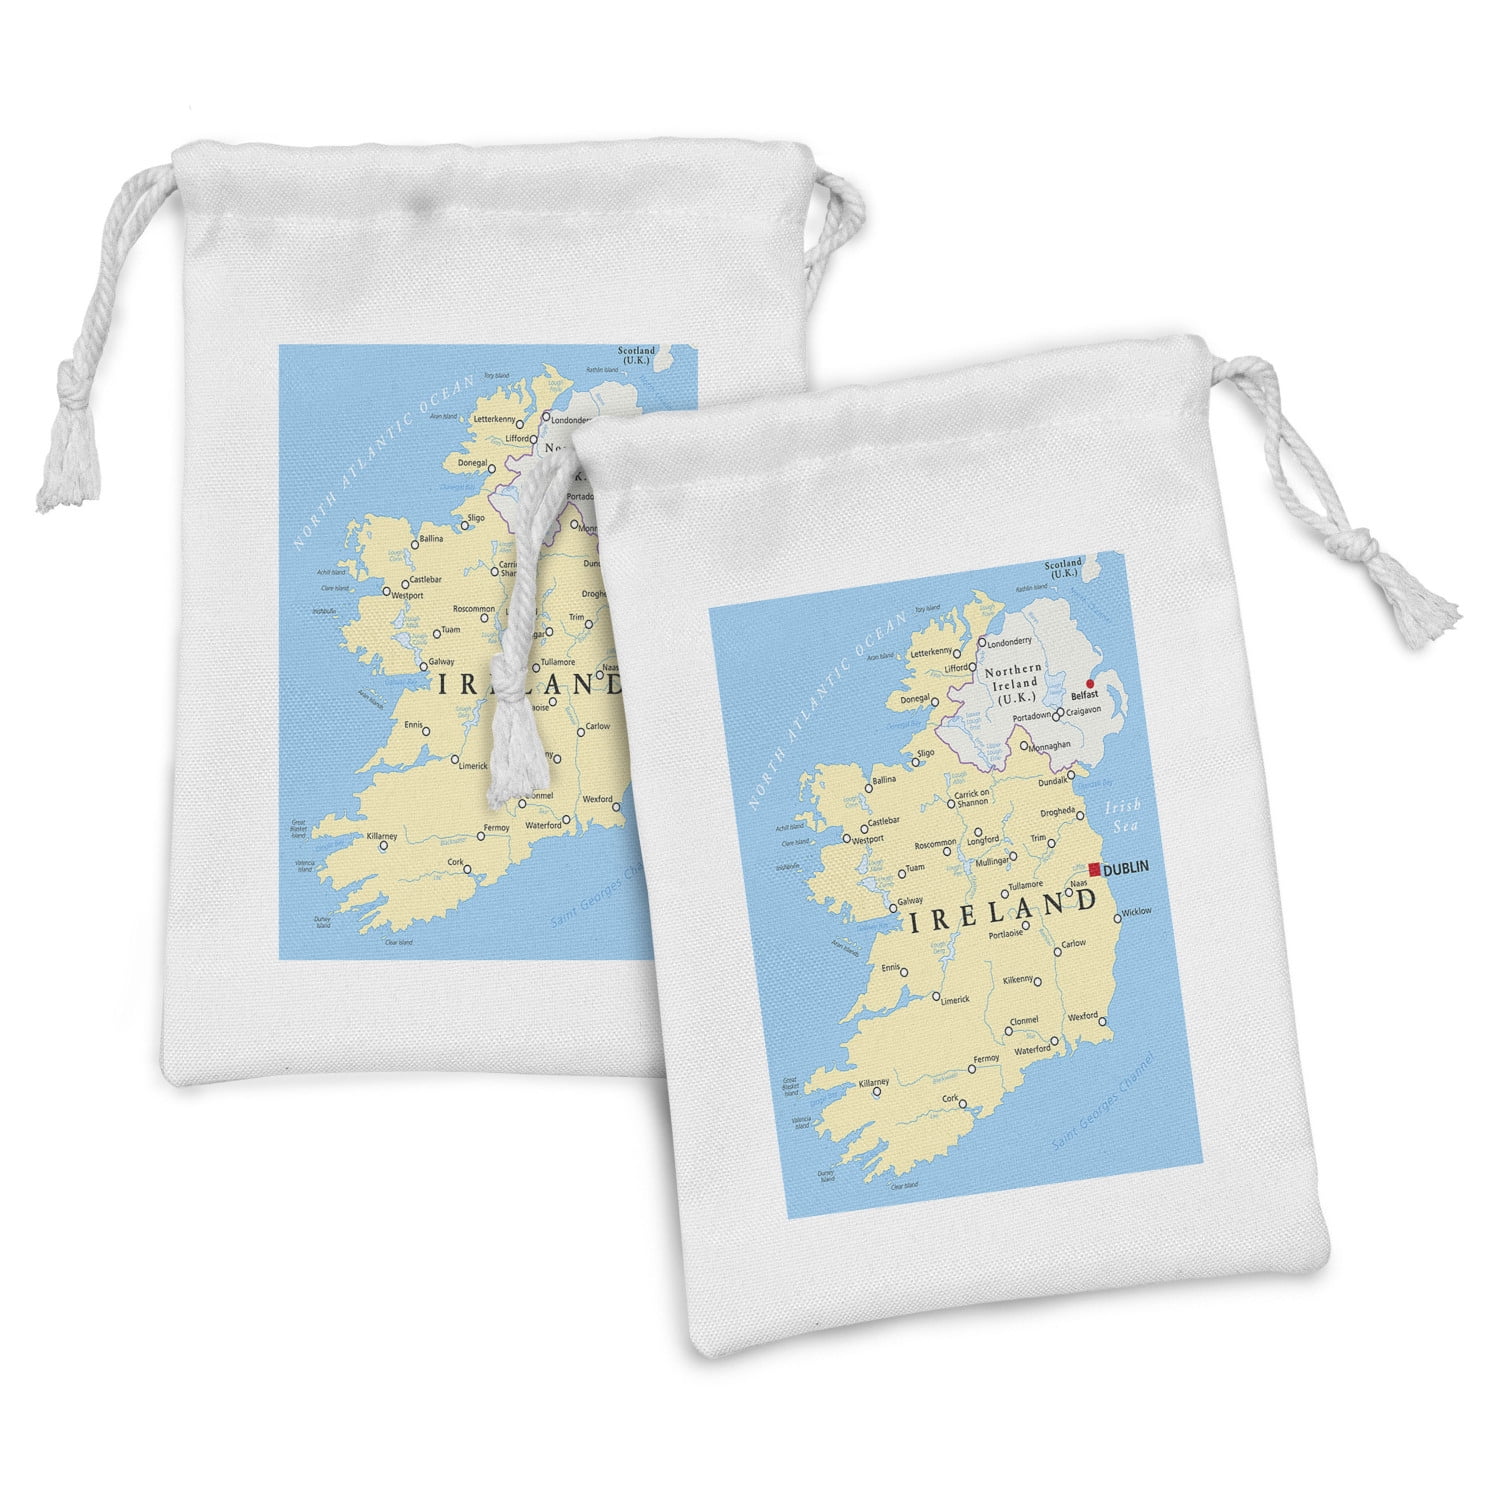 Ireland Map Fabric Pouch Set of 2, Mapping Political Geographical Cities Rivers, Small Drawstring Bag for Toiletries Masks and Favors, x 6", Deep Sky Blue Multicolor, by Ambesonne Walmart.com